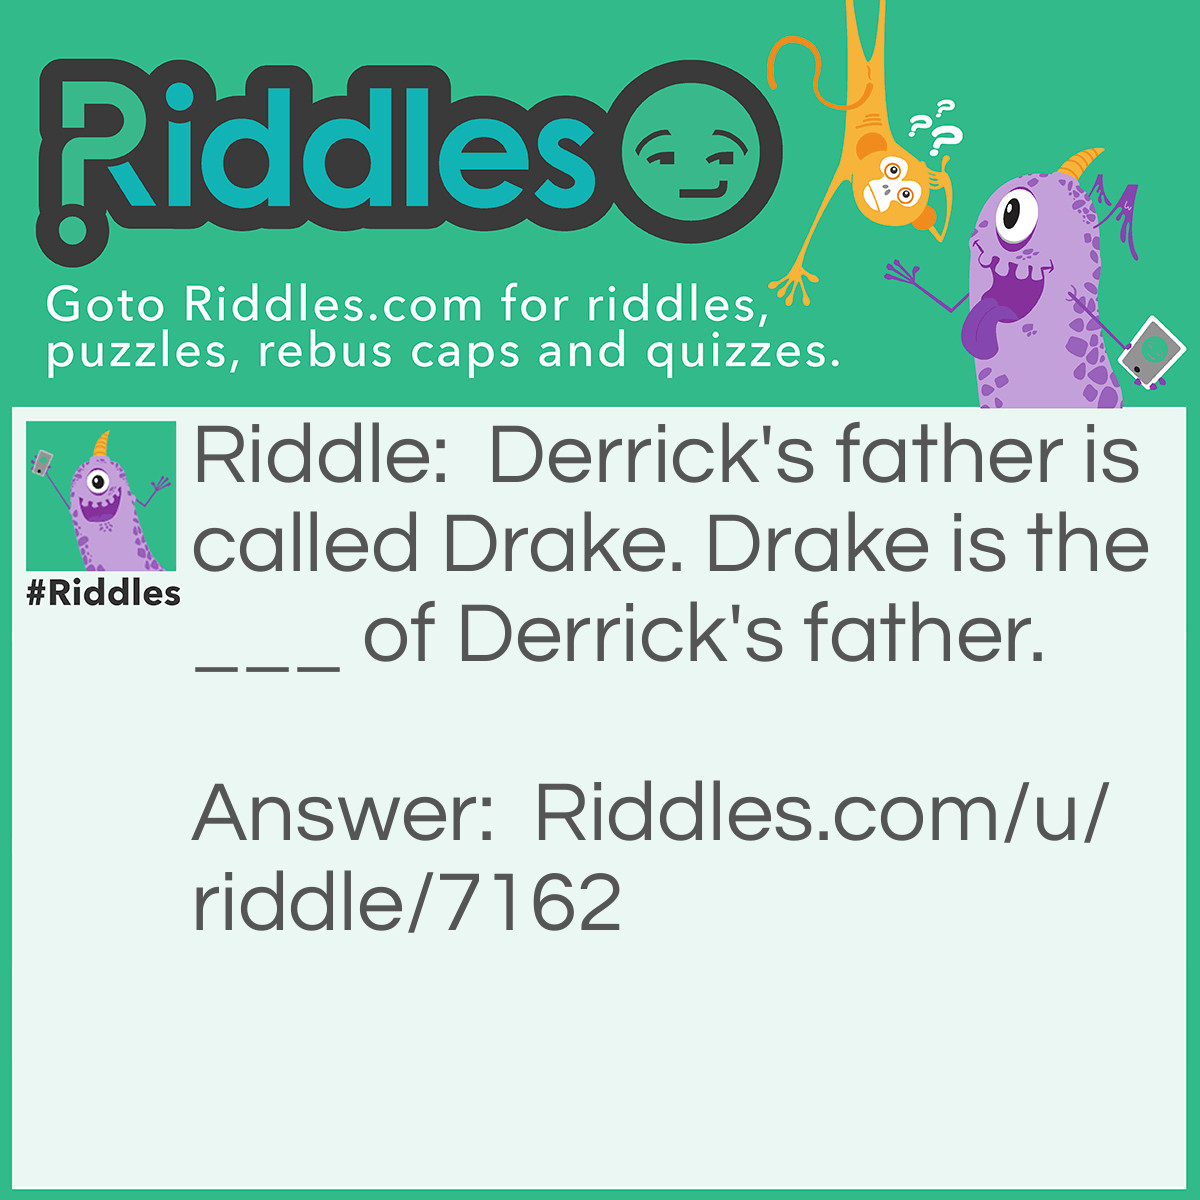 Riddle: Derrick's father is called Drake. Drake is the ___ of Derrick's father. Answer: Name